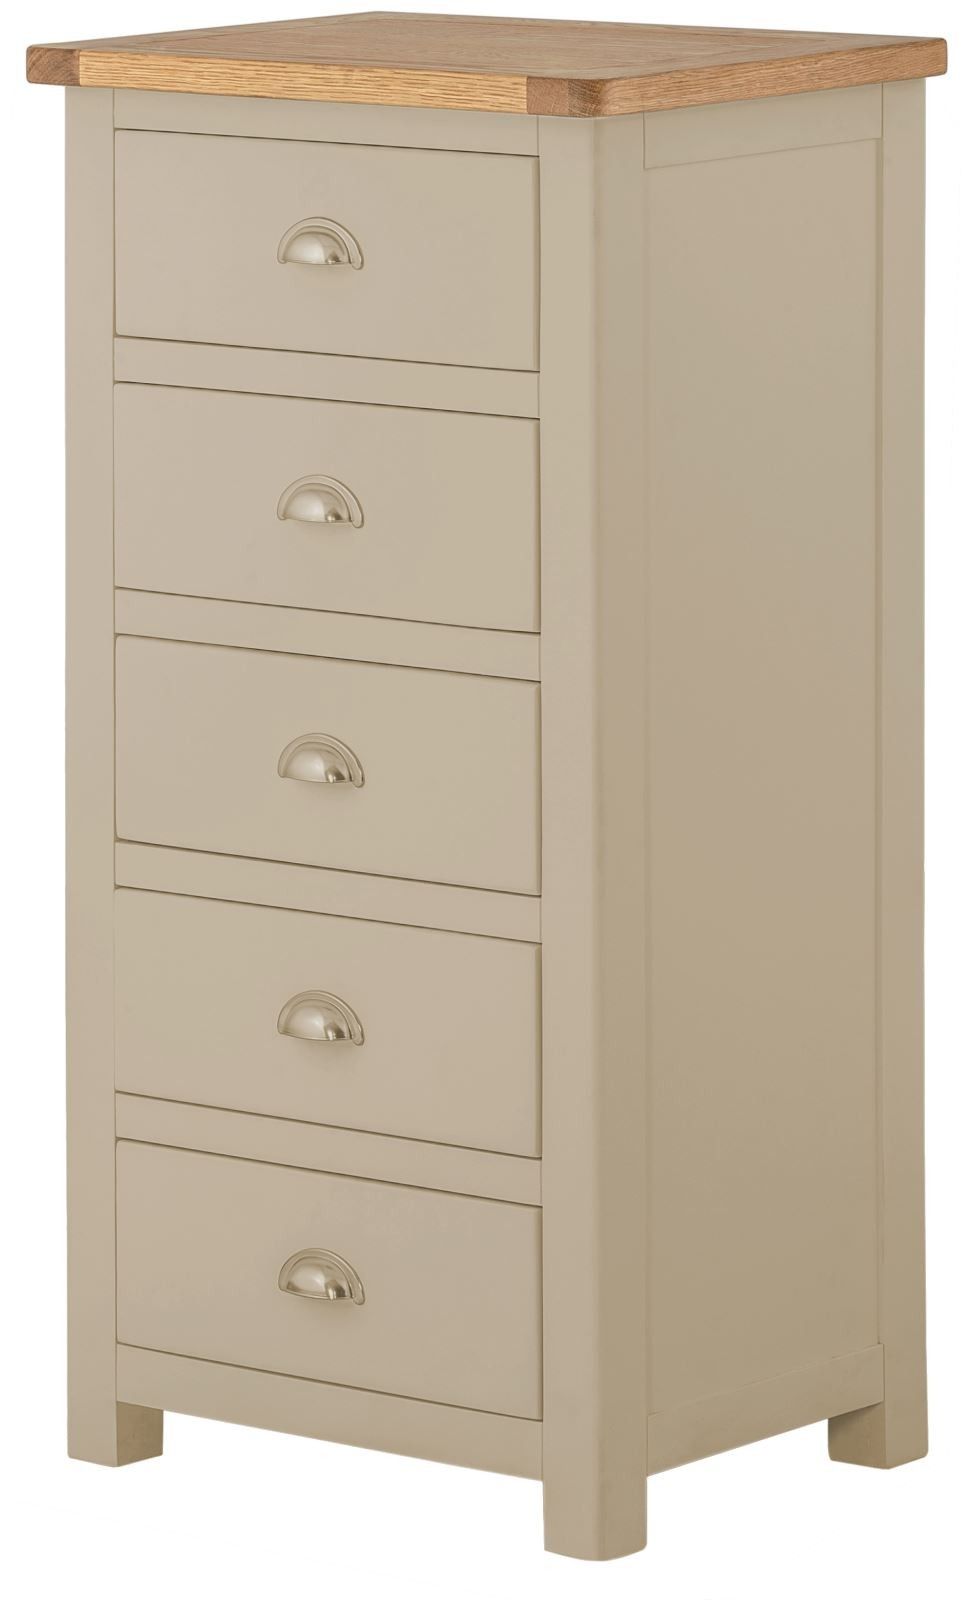 Purbeck Painted 5 Drawer Wellington Chest - Stone